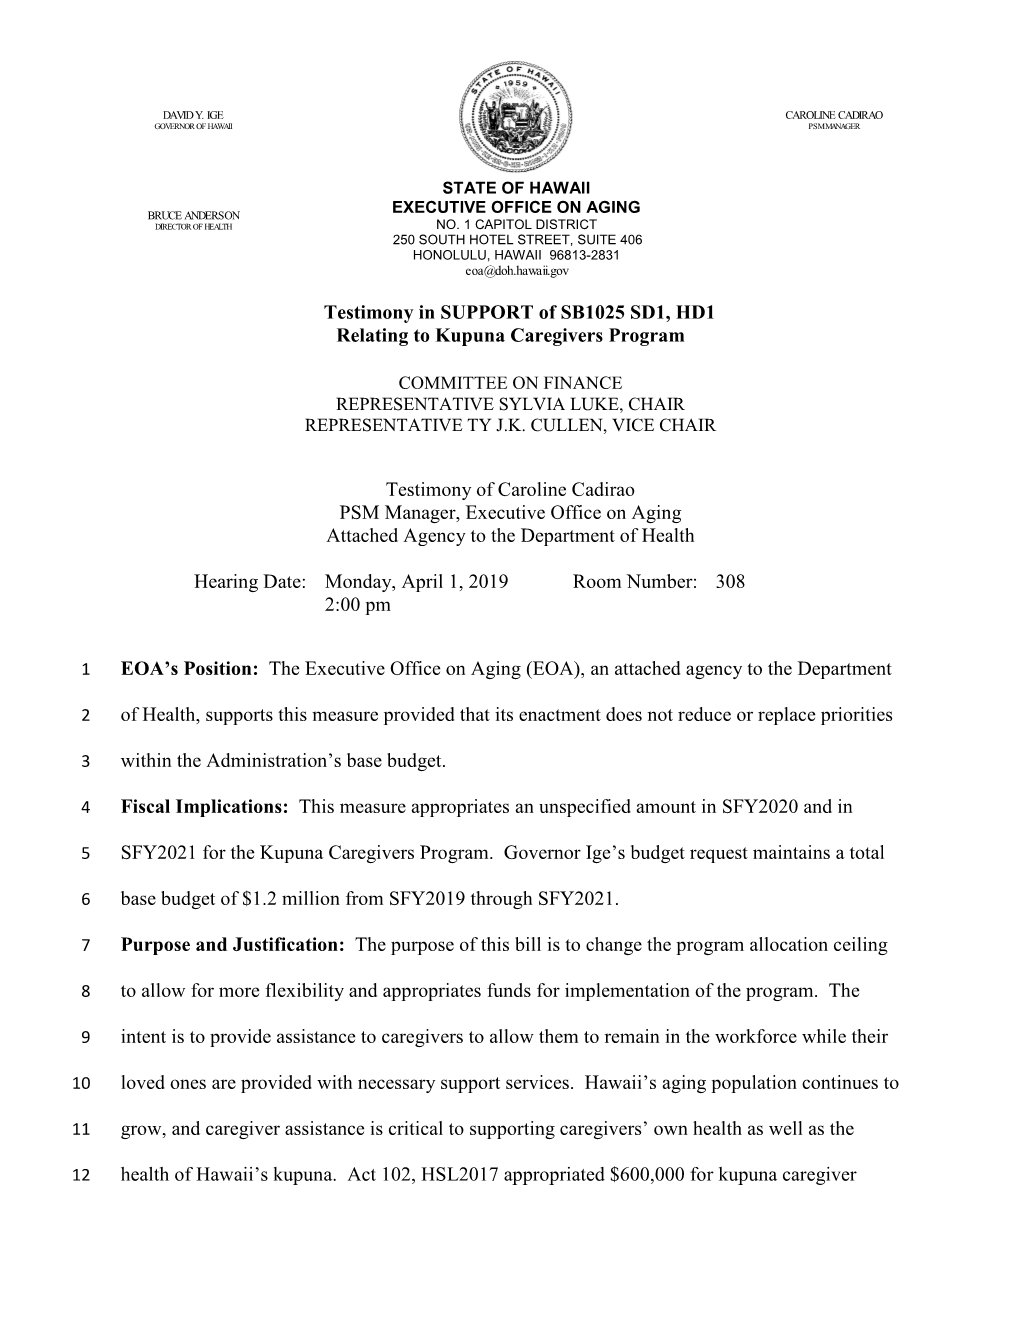 Testimony in SUPPORT of SB1025 SD1, HD1 Relating to Kupuna Caregivers Program